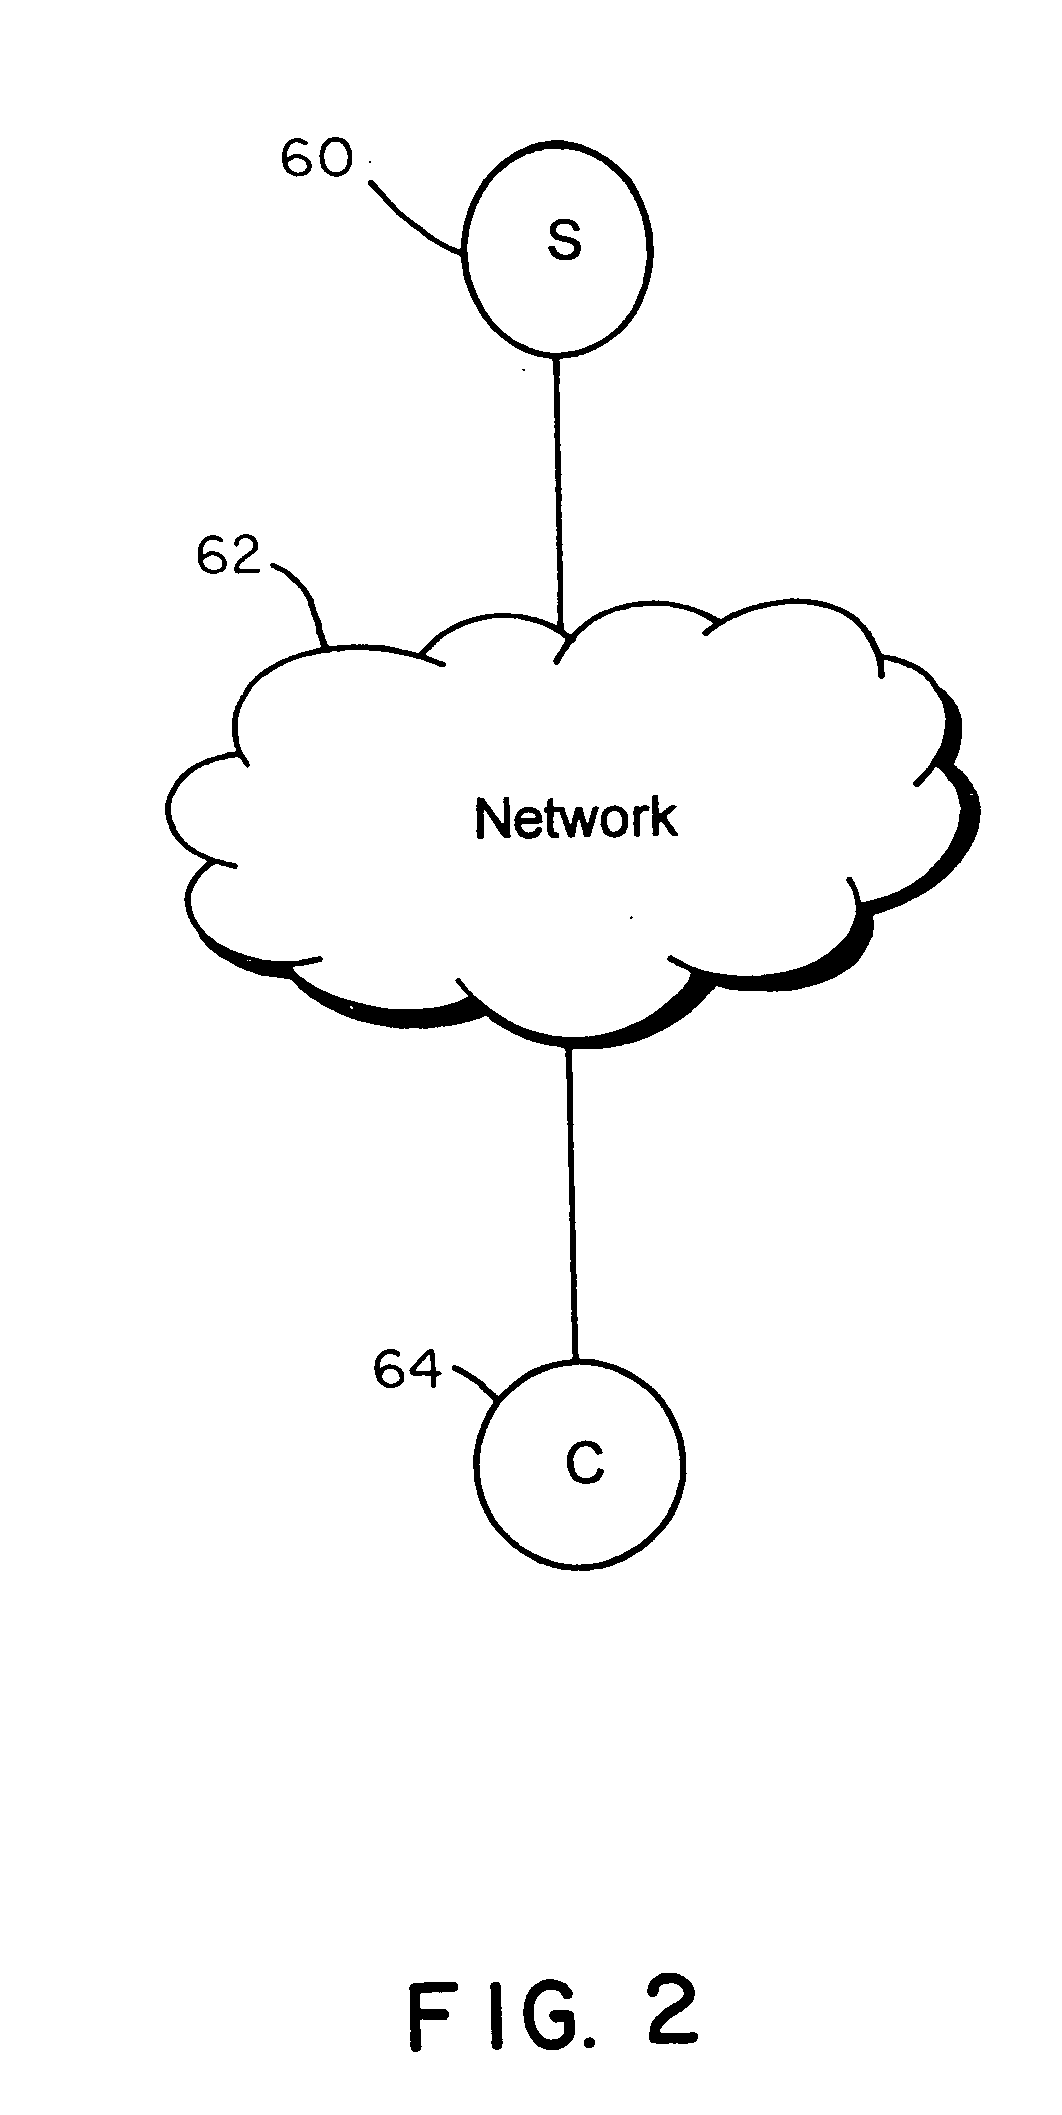 Method, system, and article to provide data analysis or searching